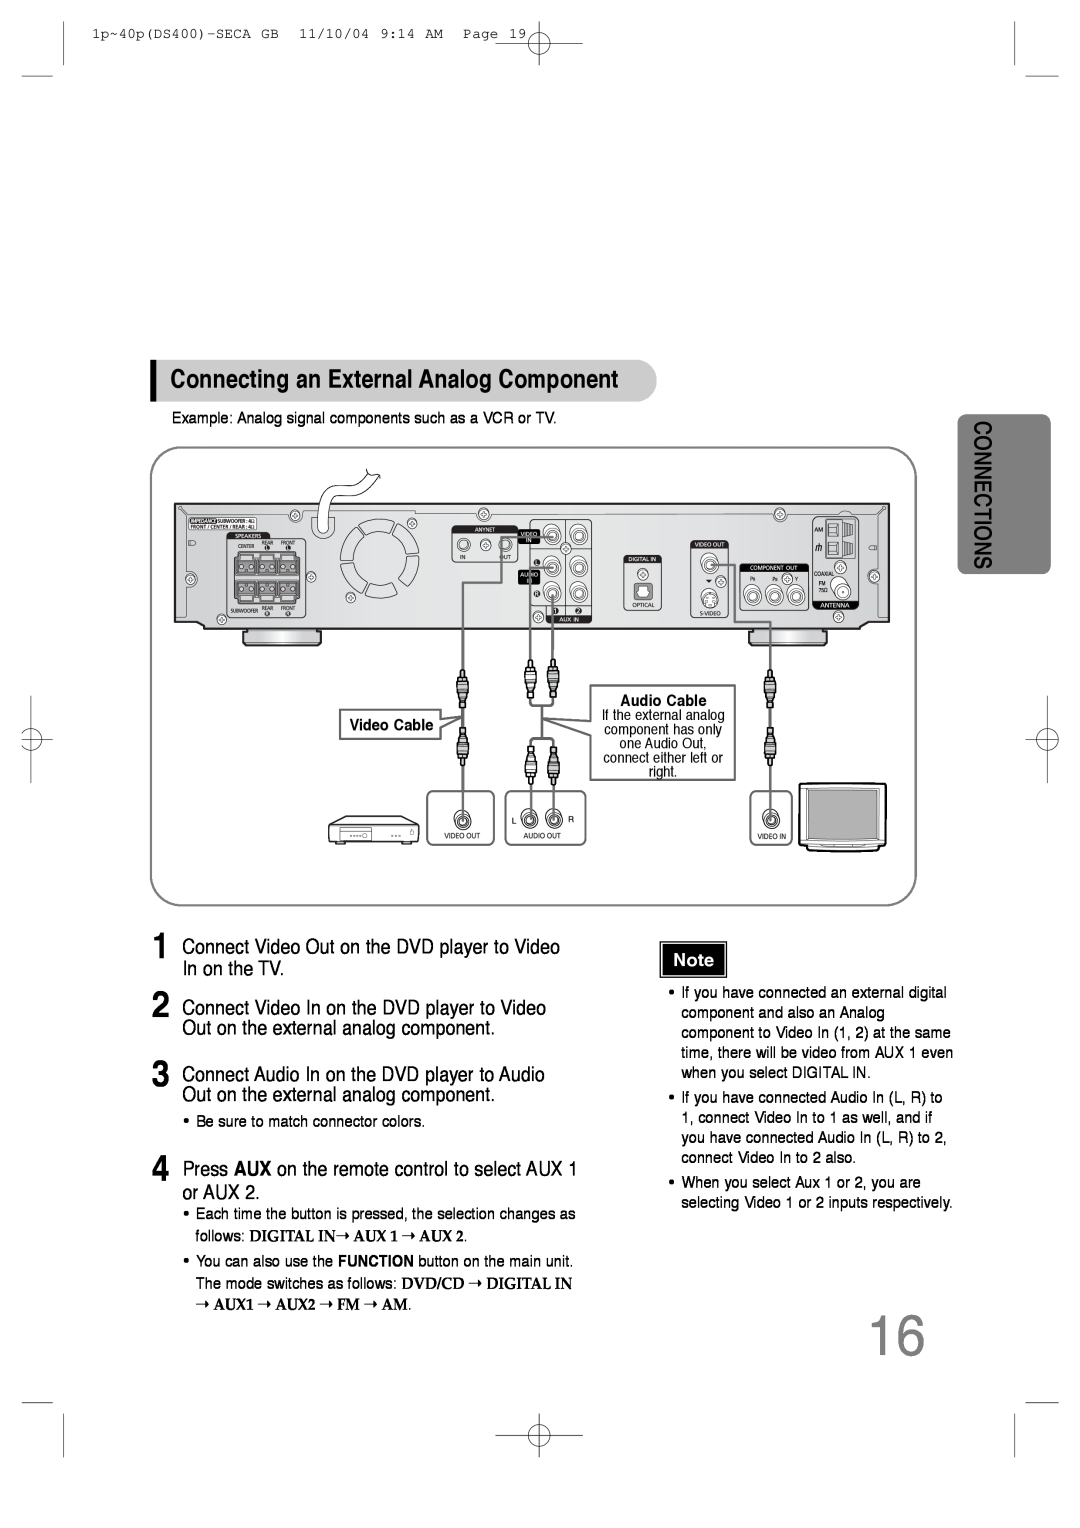 Samsung HT-DS400 instruction manual Connecting an External Analog Component, Connections, Video Cable 